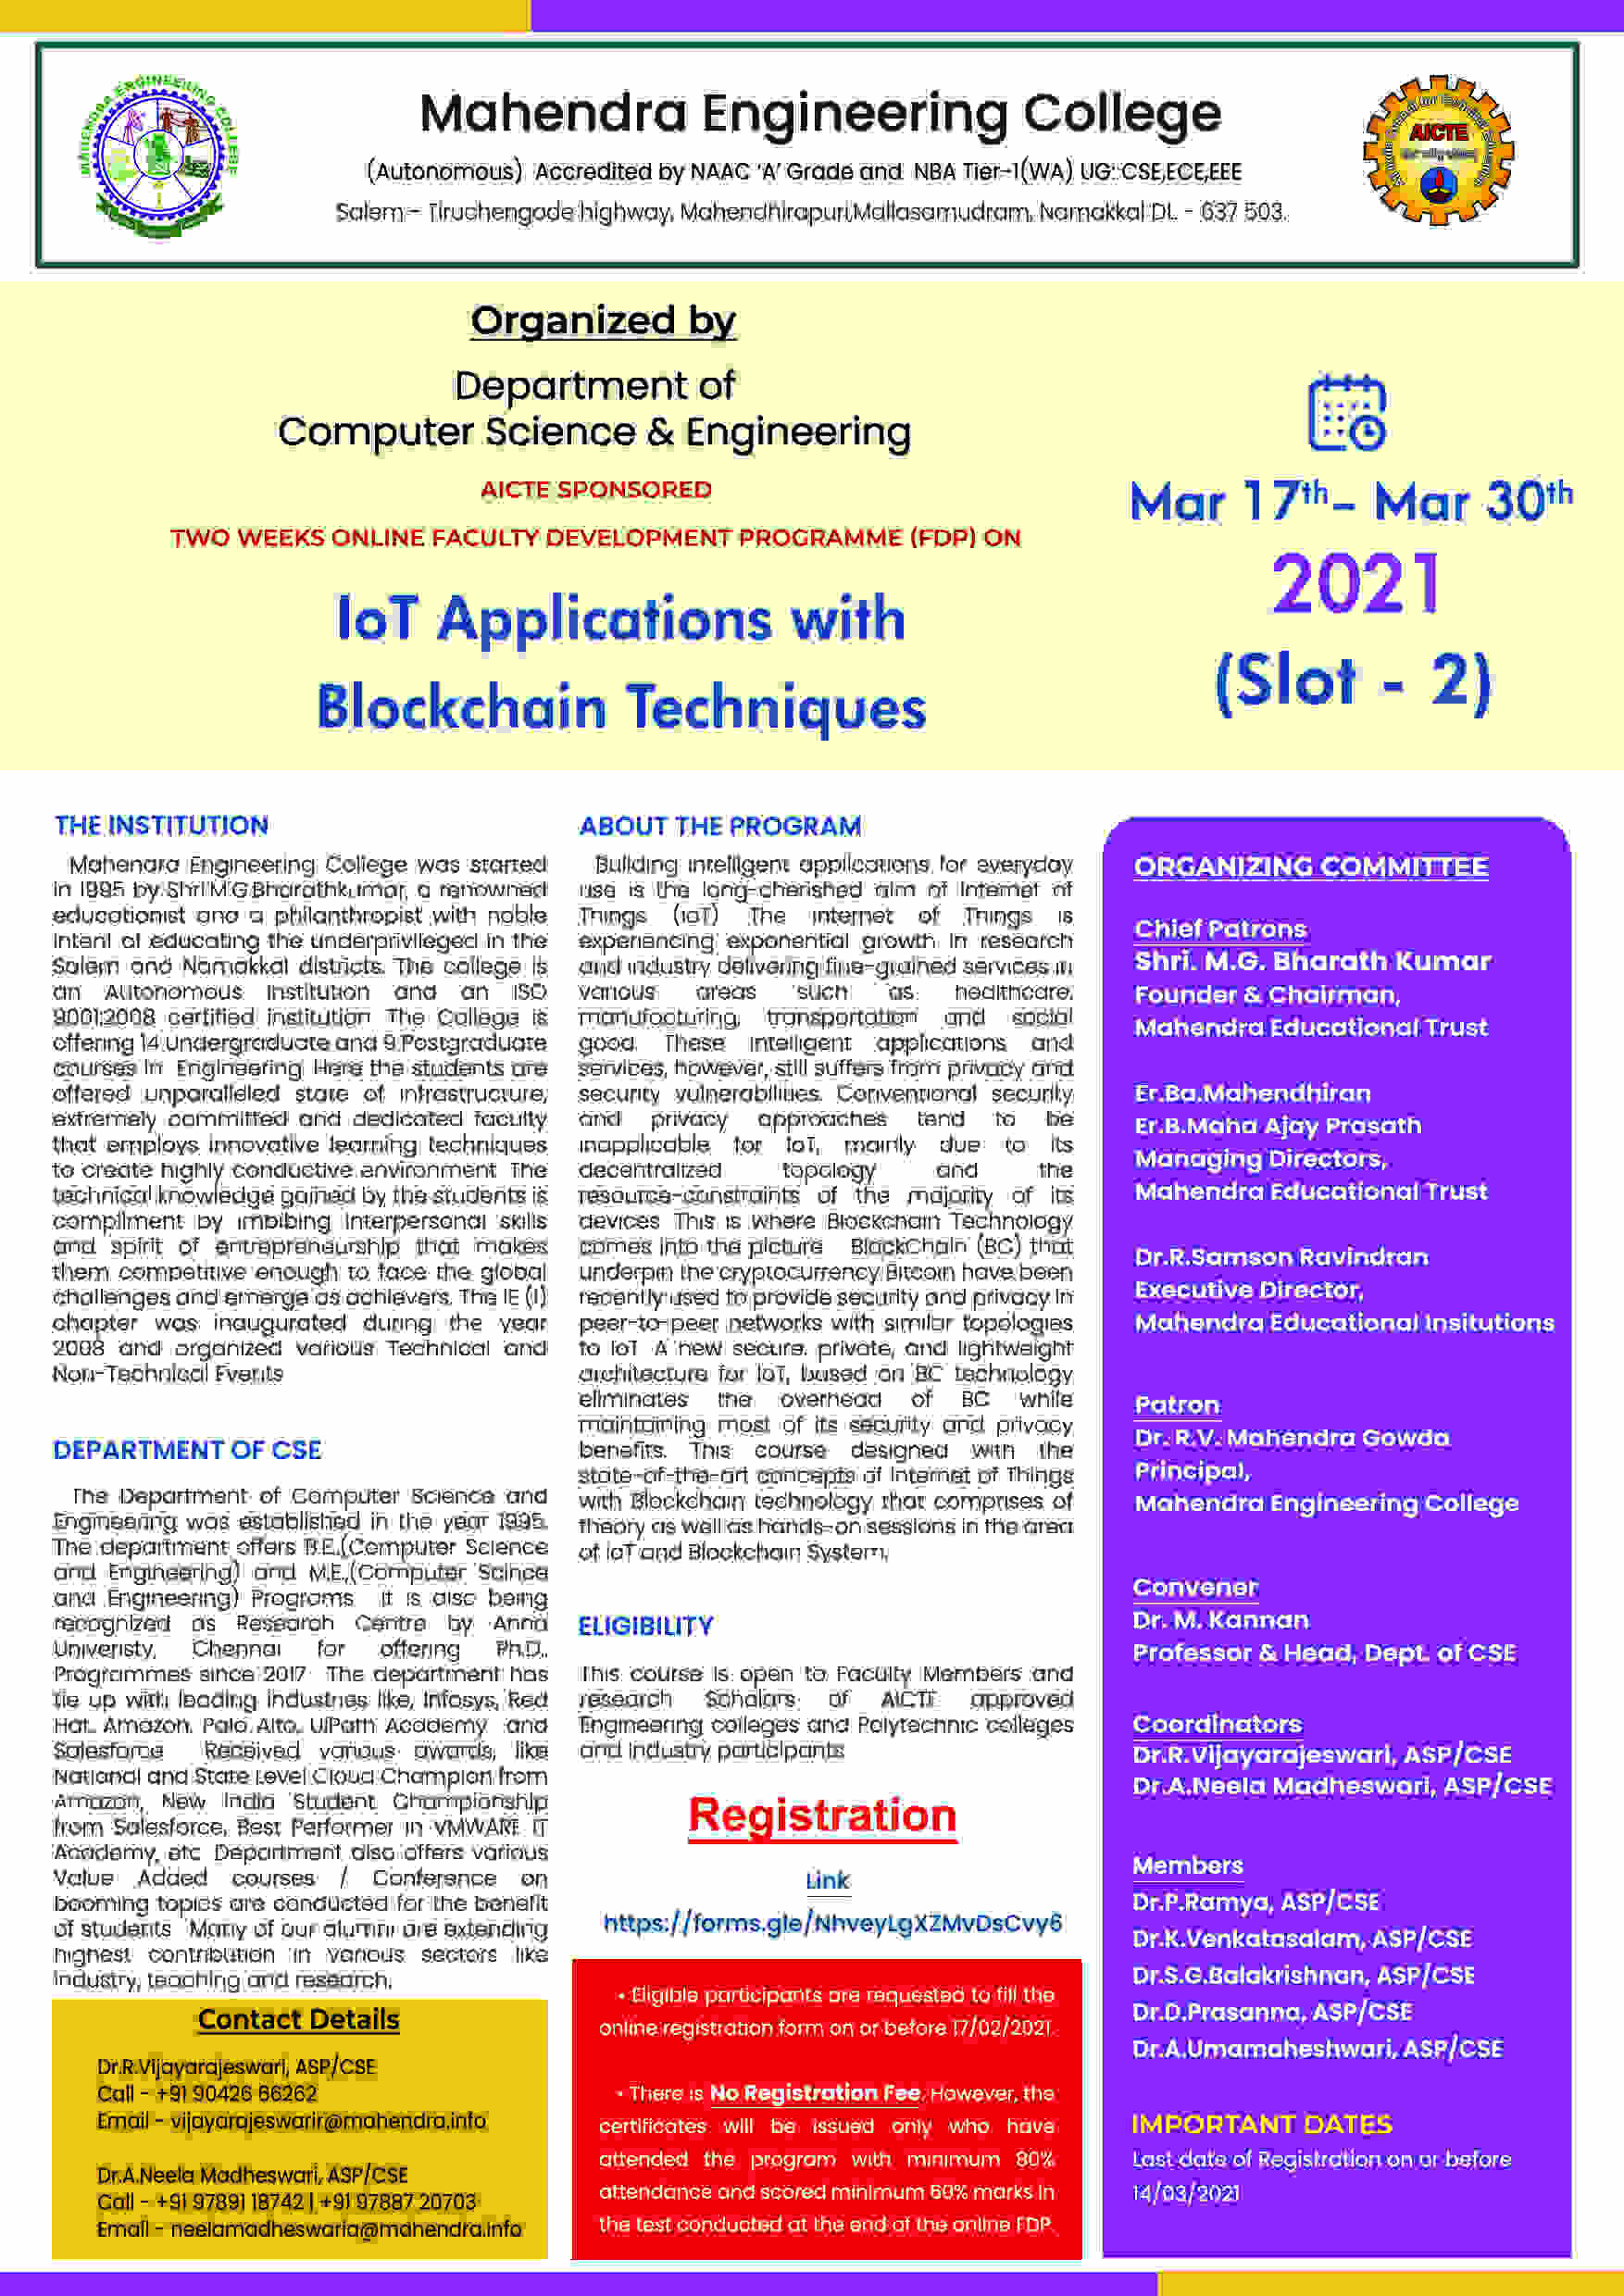 AICTE Sponsored Online Two Weeks online FDP on IoT Applications with Blockchain Techniques 2021